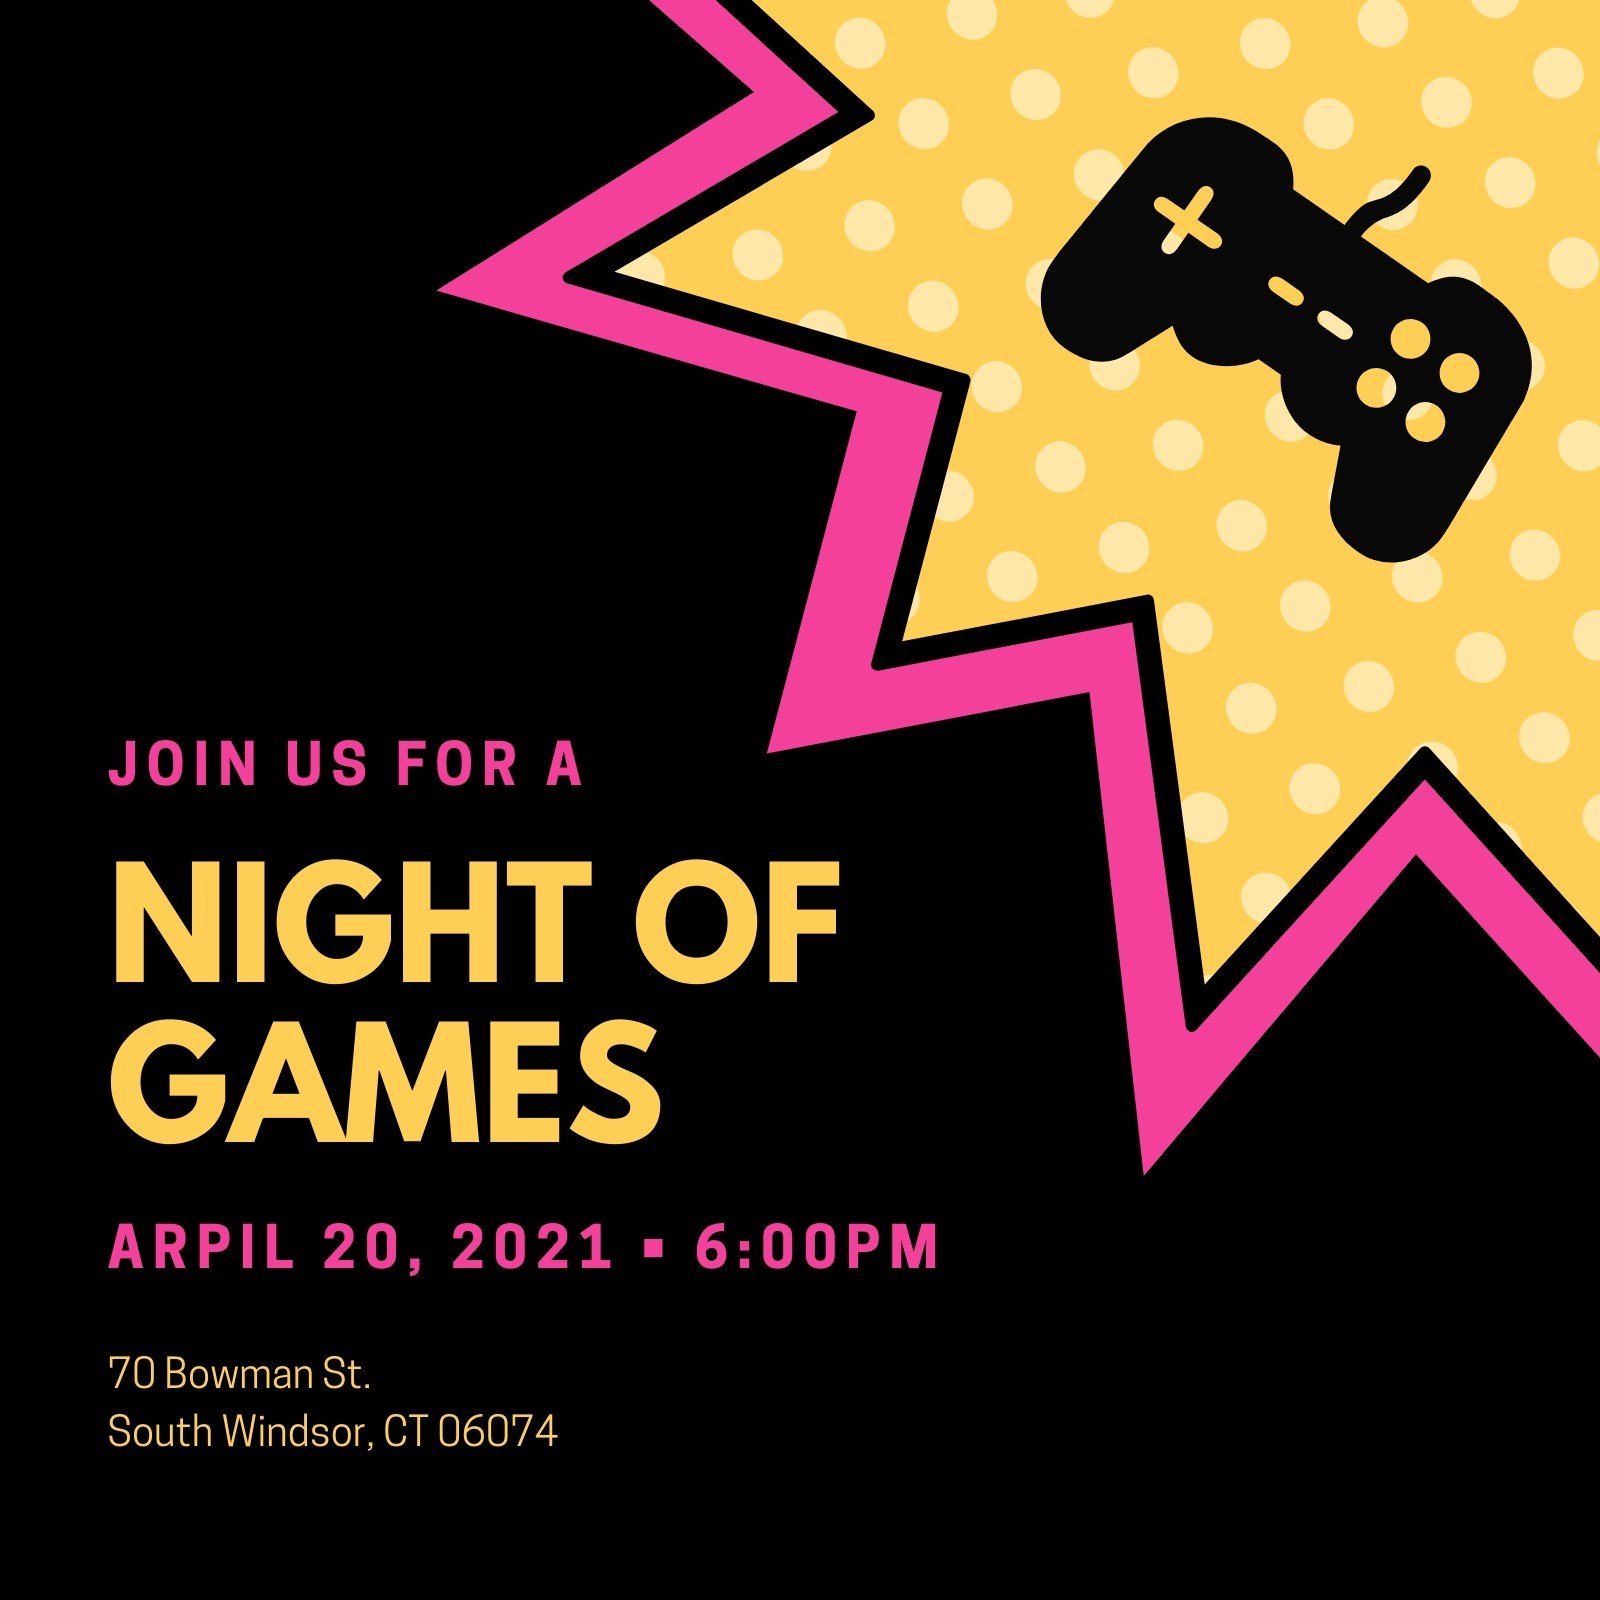 Customize 22+ Game Night Invitations Templates Online - Canva With Regard To Game Night Flyer Template